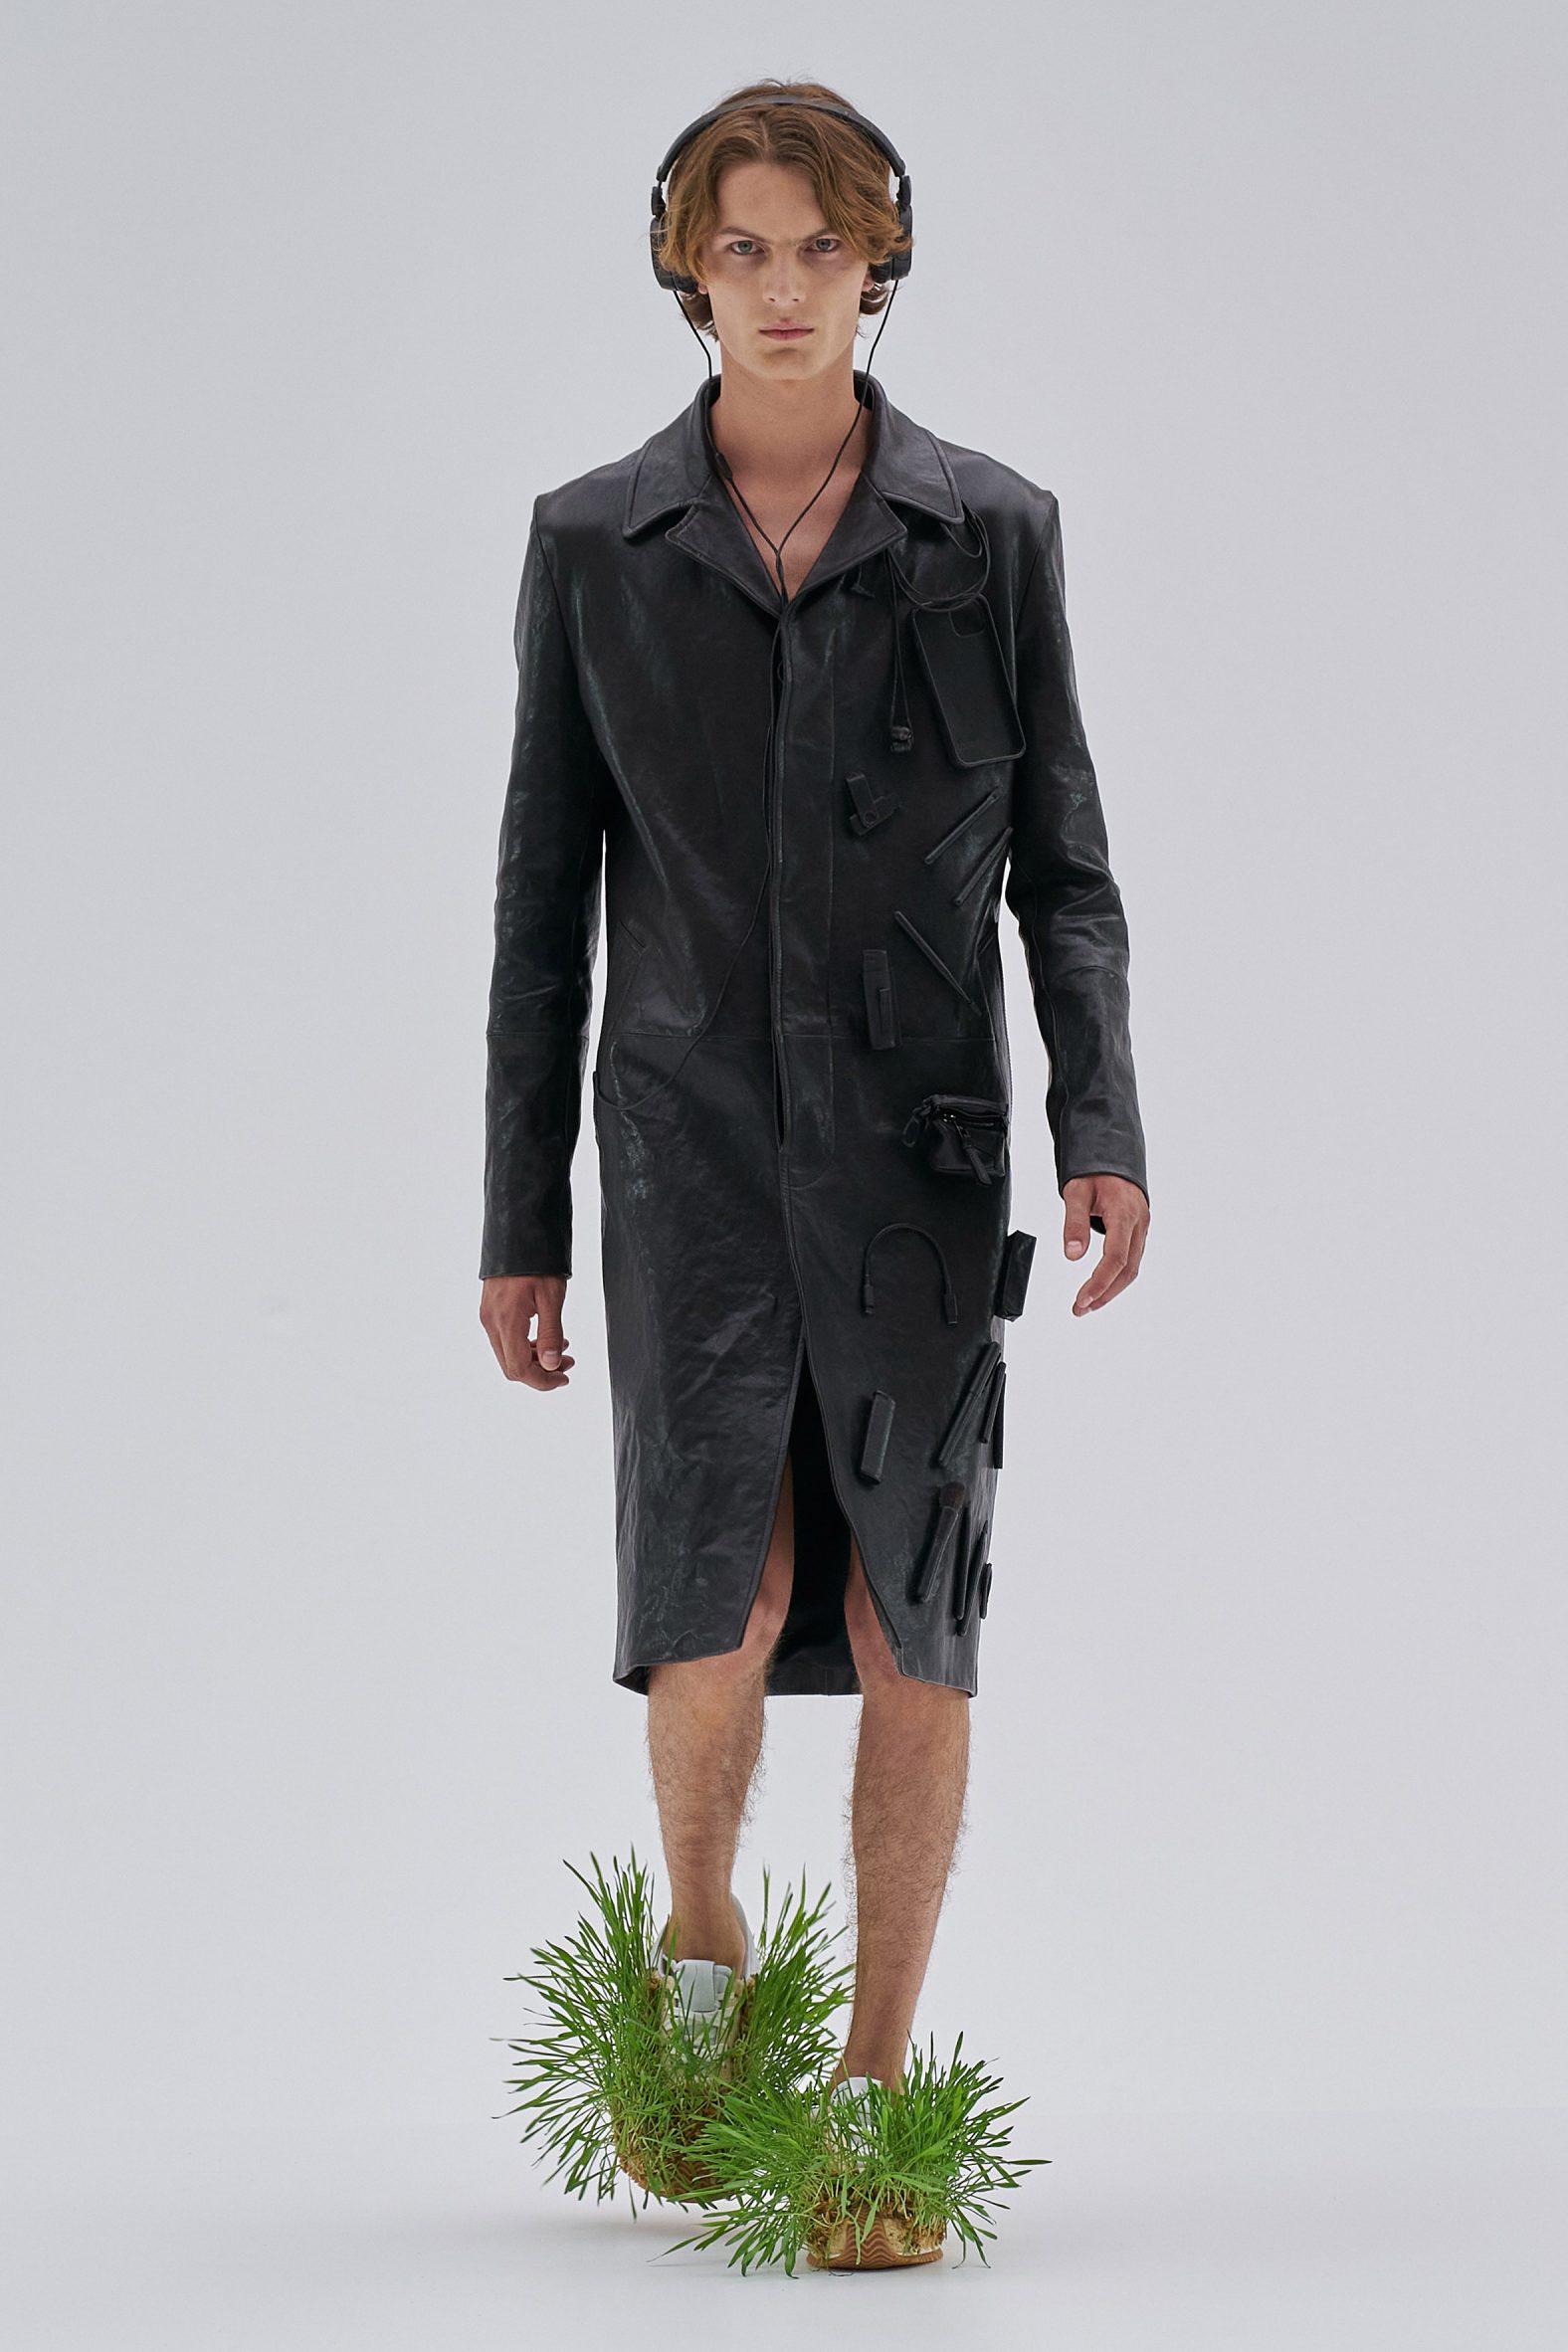 Jonathan Anderson Experiments with Nature-Tech for Loewe's Men's S